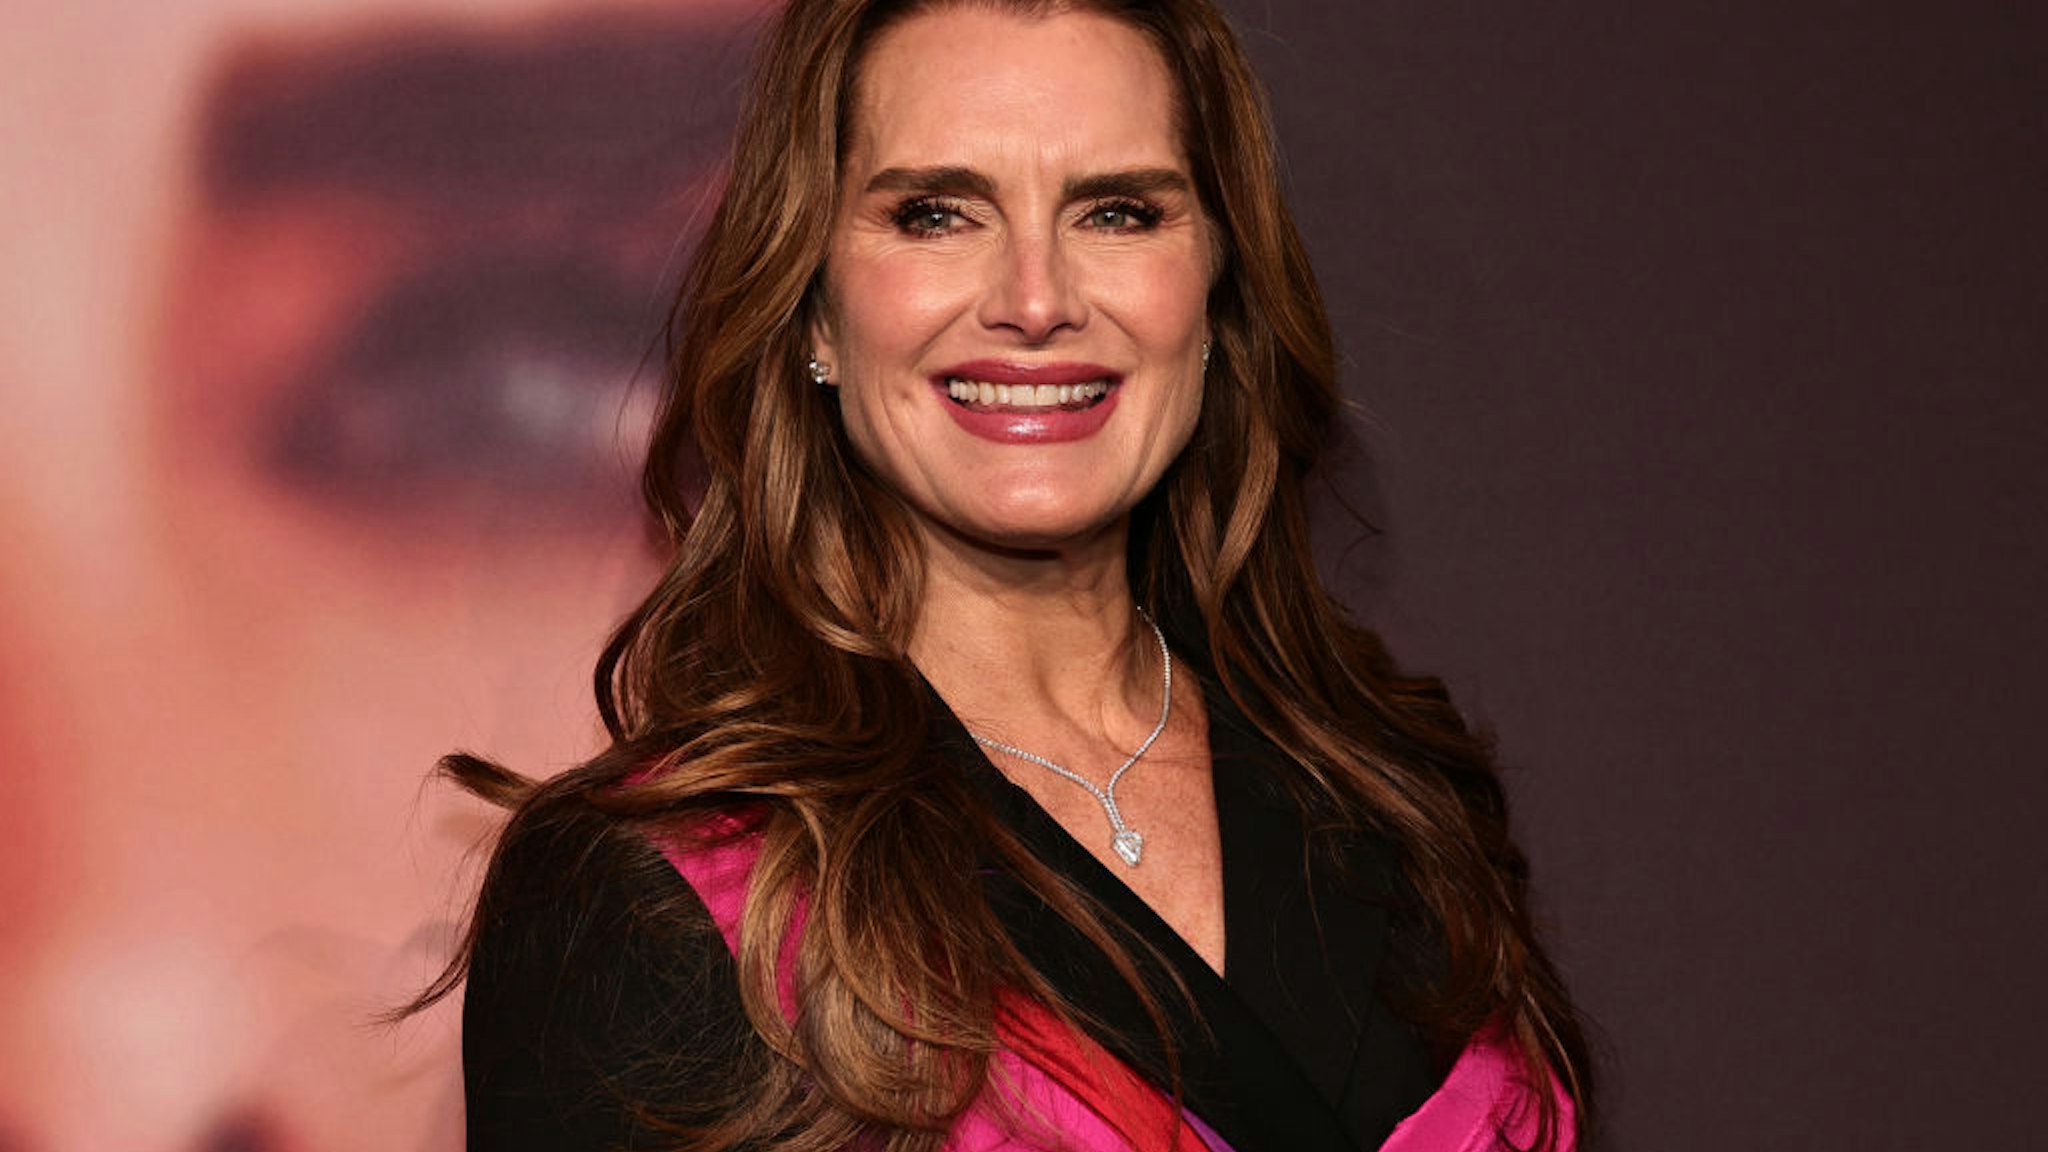 NEW YORK, NEW YORK - MARCH 29: Brooke Shields attends the "Pretty Baby: Brooke Shields" New York Premiere at Alice Tully Hall on March 29, 2023 in New York City. (Photo by Jamie McCarthy/Getty Images)